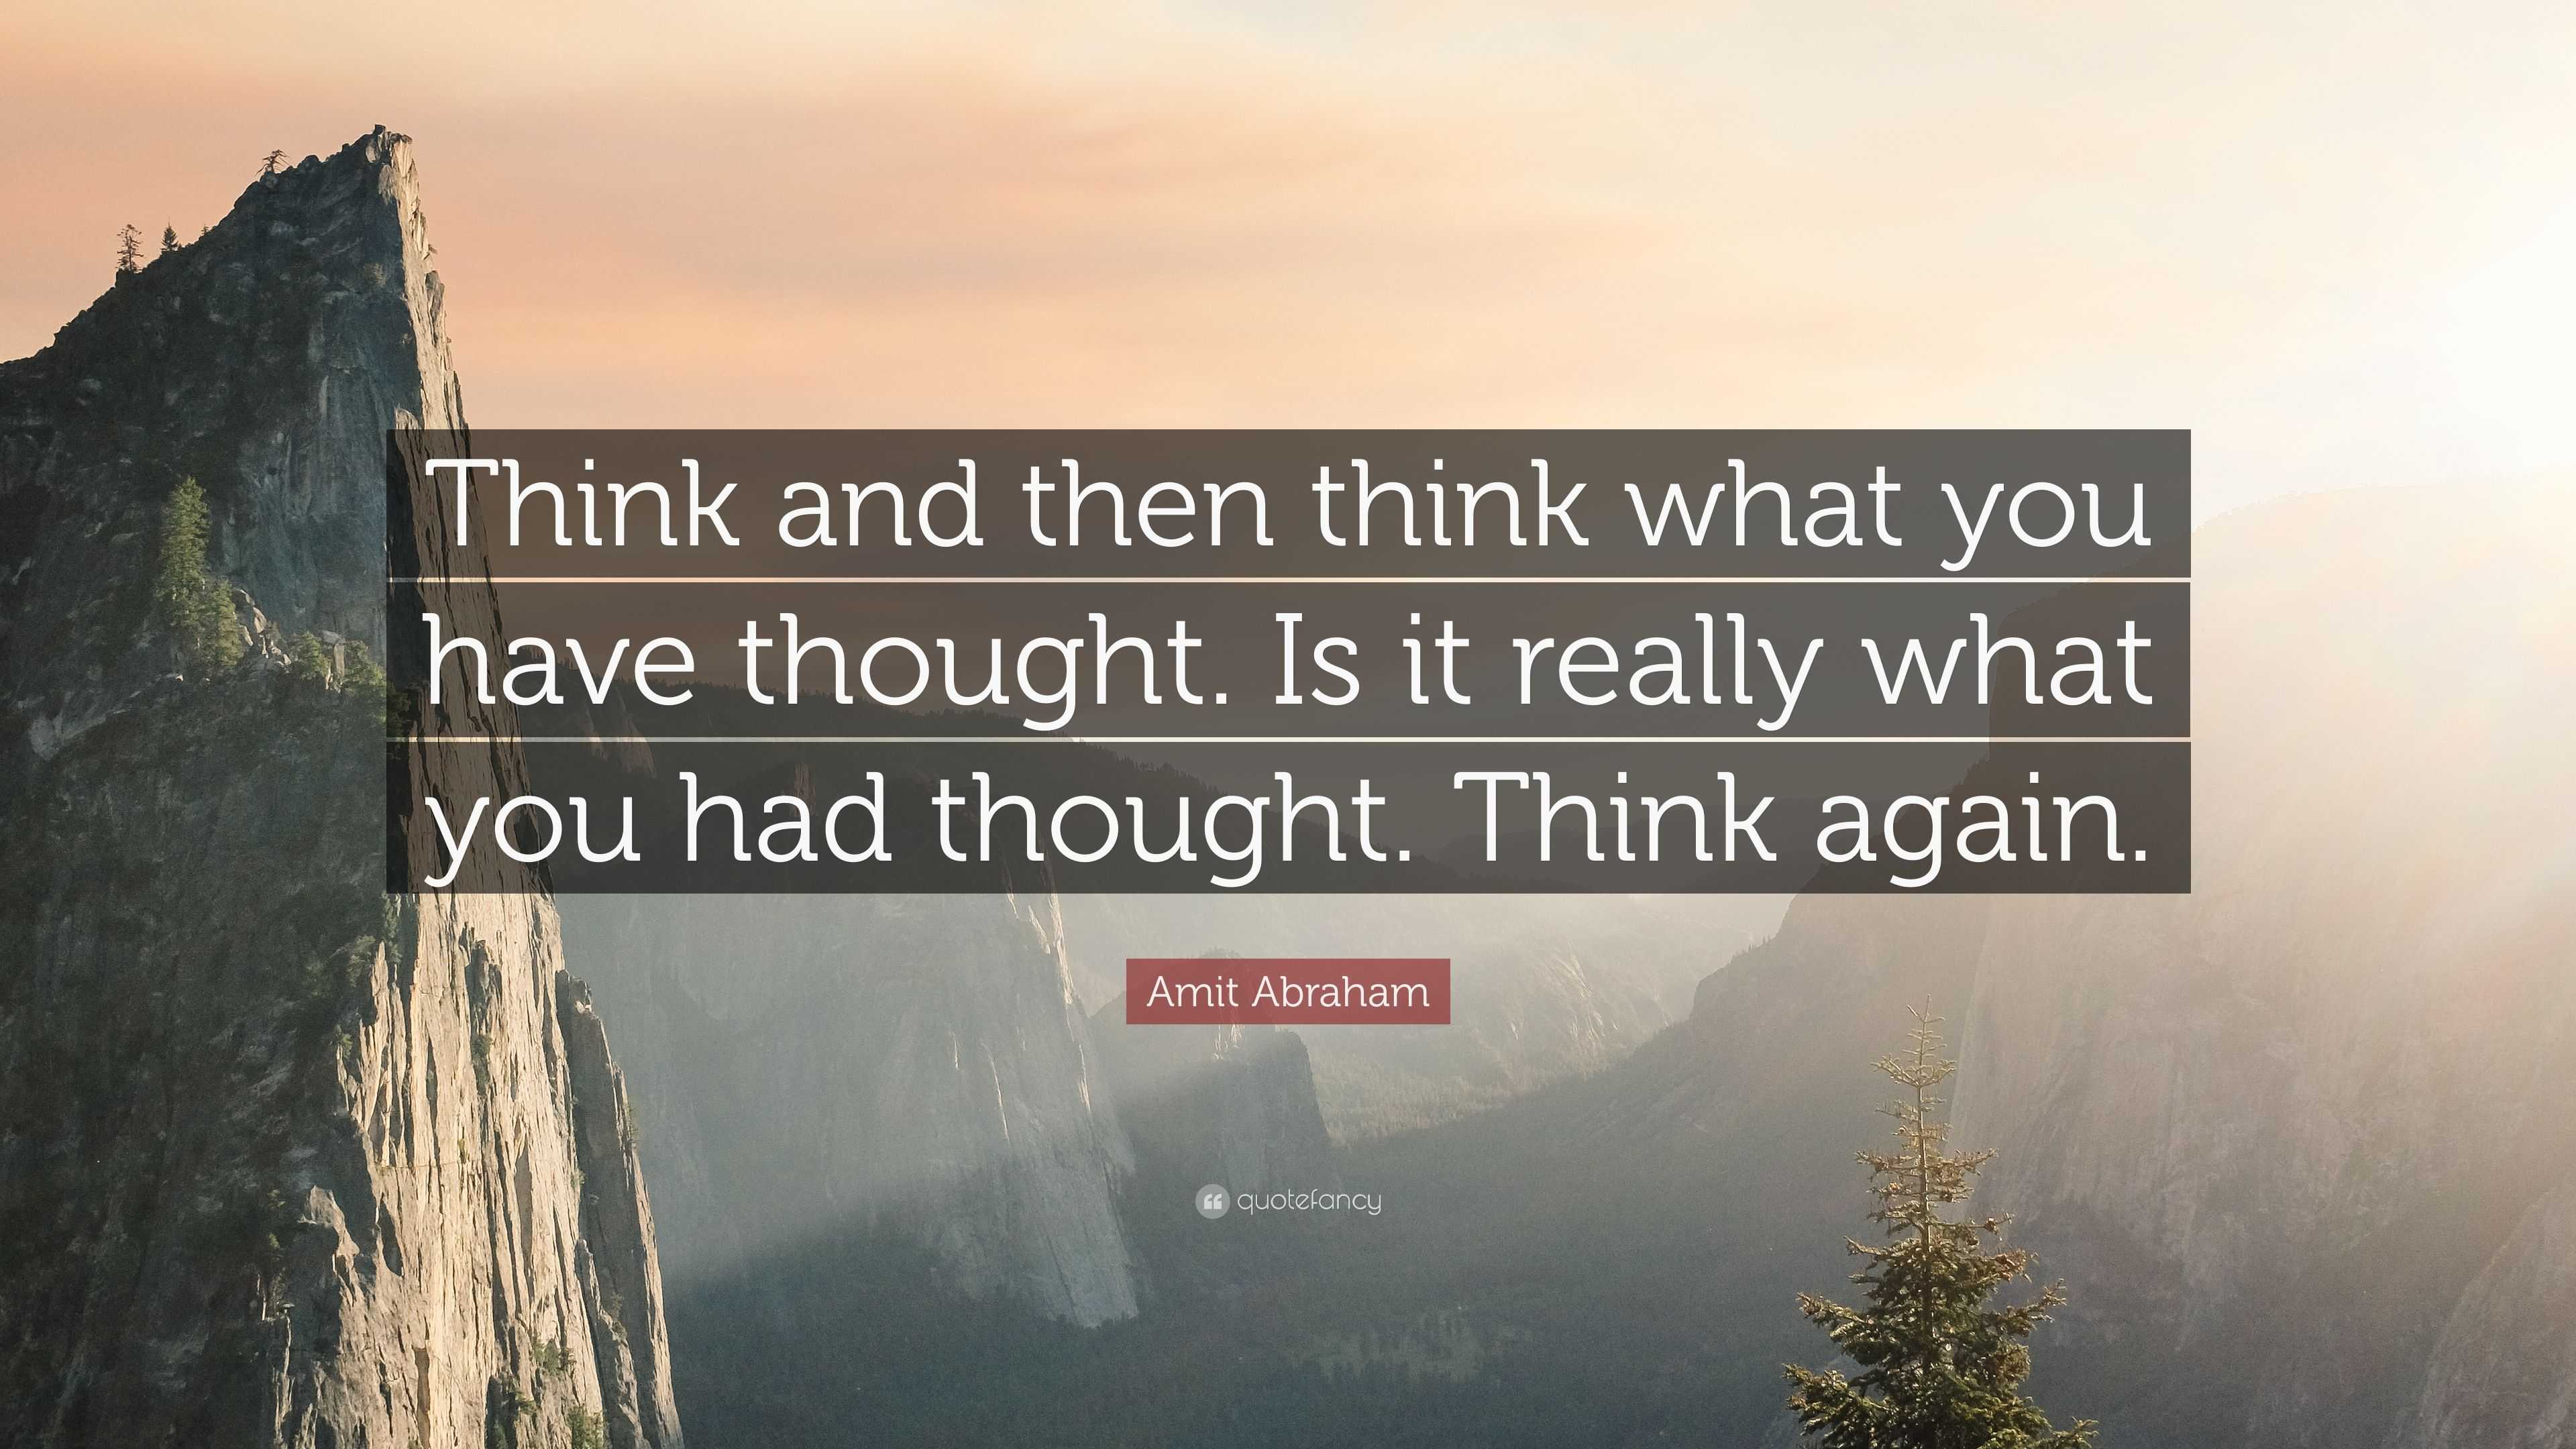 Amit Abraham Quote: “Think and then think what you have thought. Is it ...